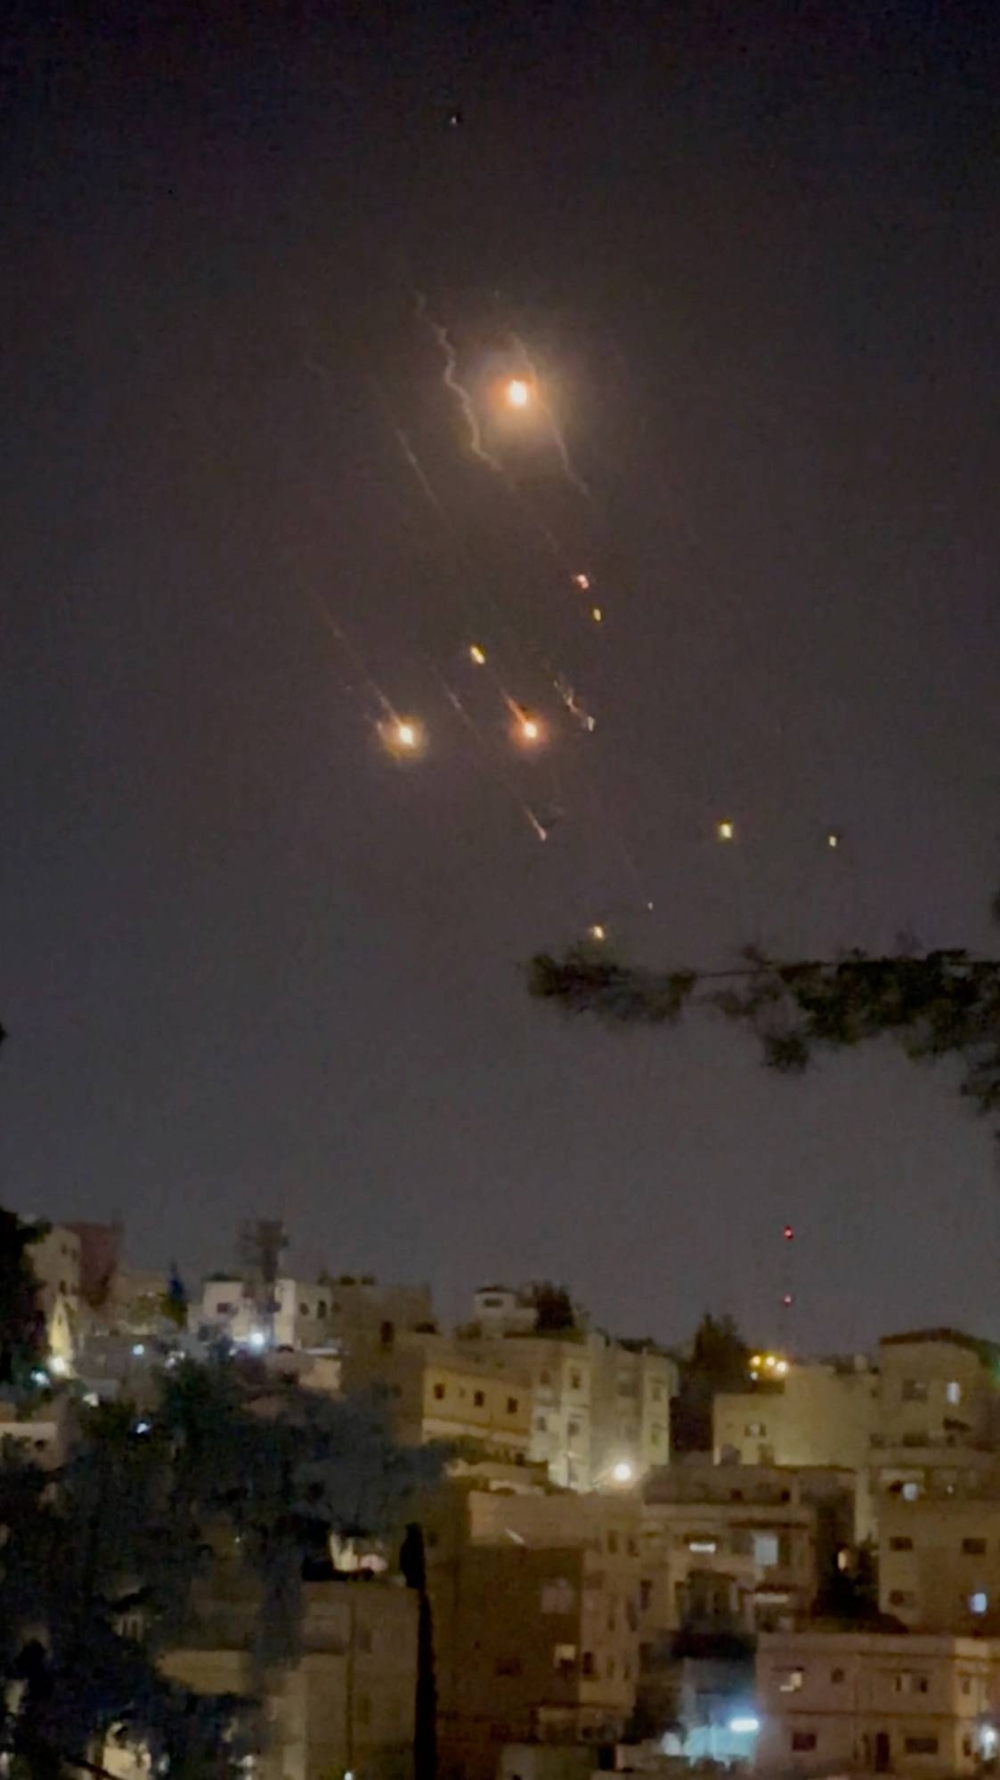 Objects are seen in the sky over Amman after Iran launched drones toward Israel, in Amman, Jordan, on Sunday, in this screen grab from a video on social media.